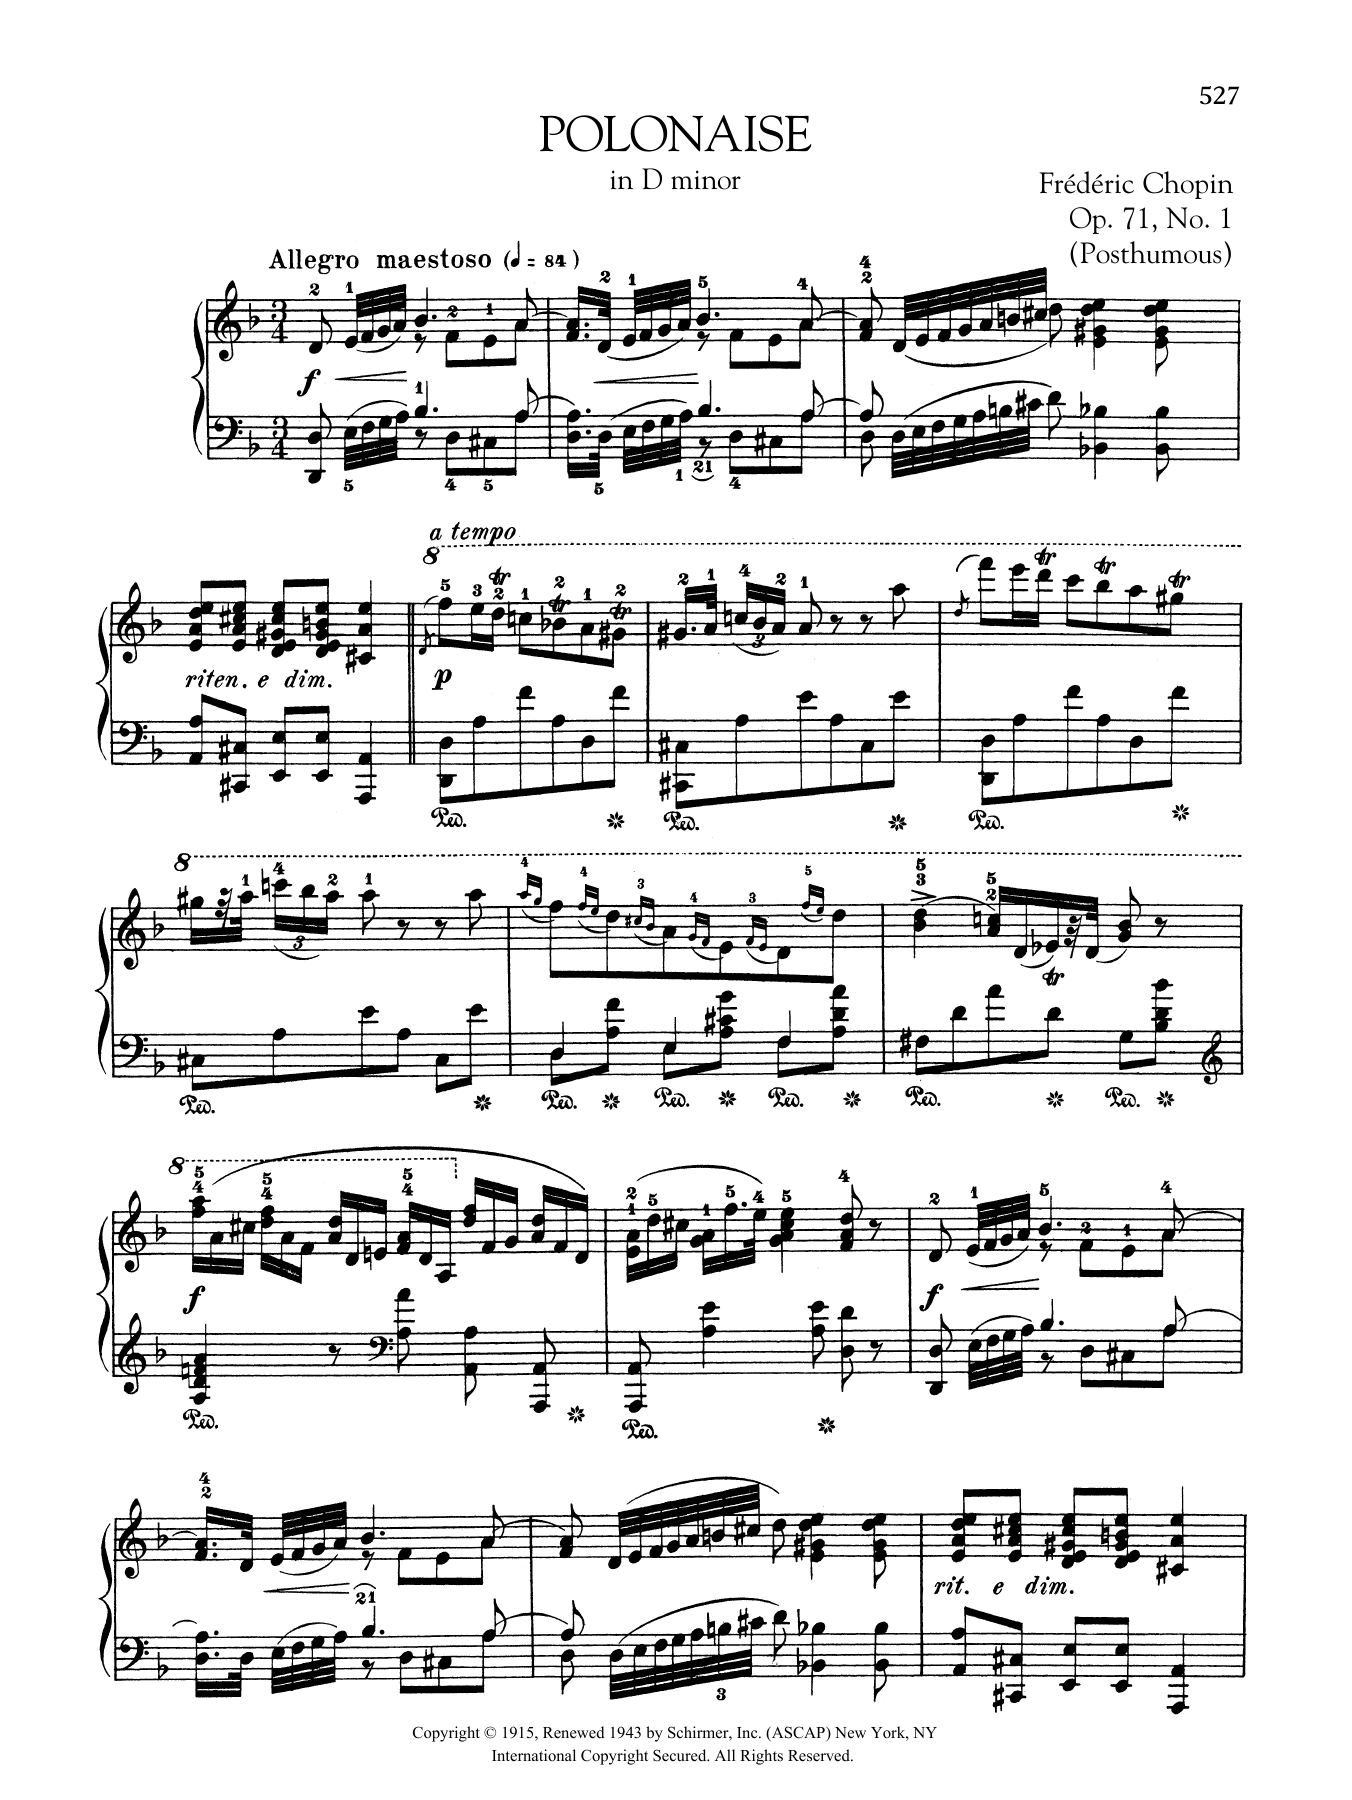 Download Frederic Chopin Polonaise in D minor, Op. 71, No. 1 (Po Sheet Music